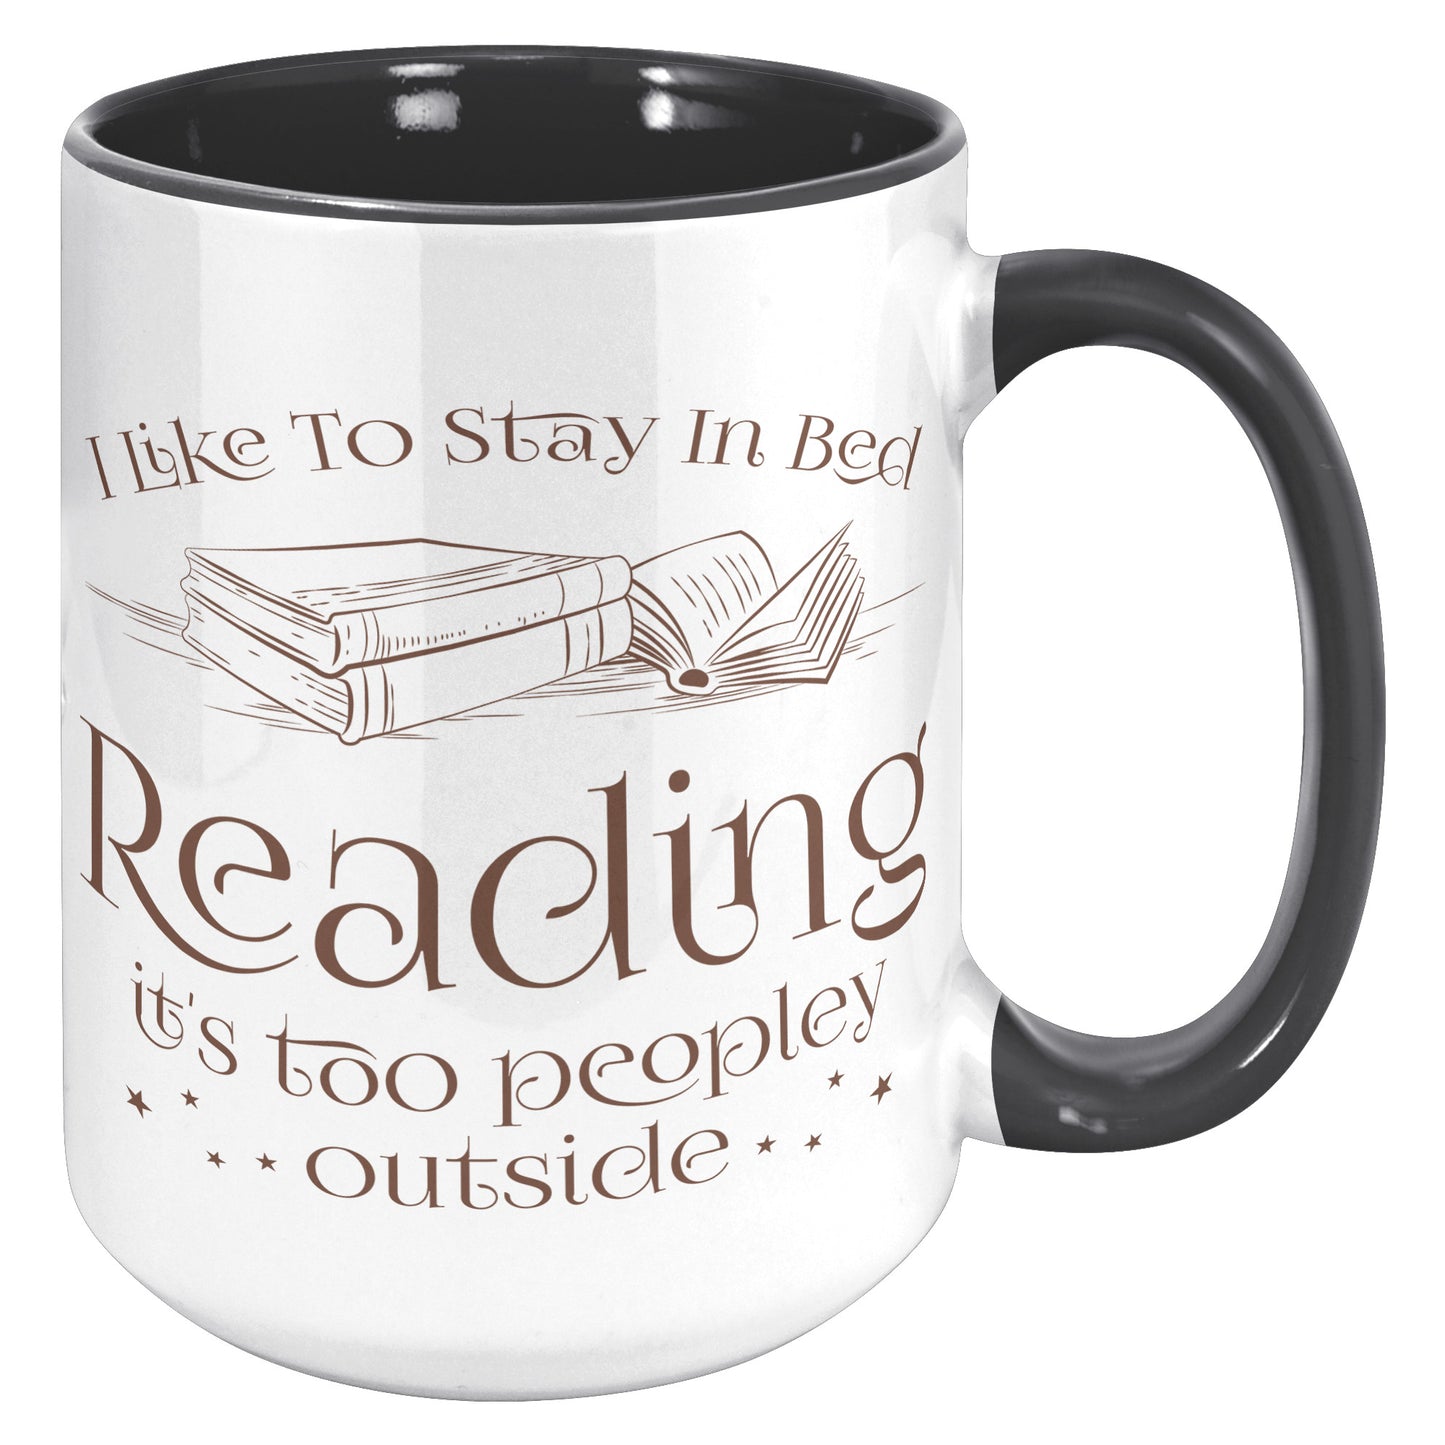 I Like To Stay In Bed Reading It's Too Peopley Outside | Accent Mug